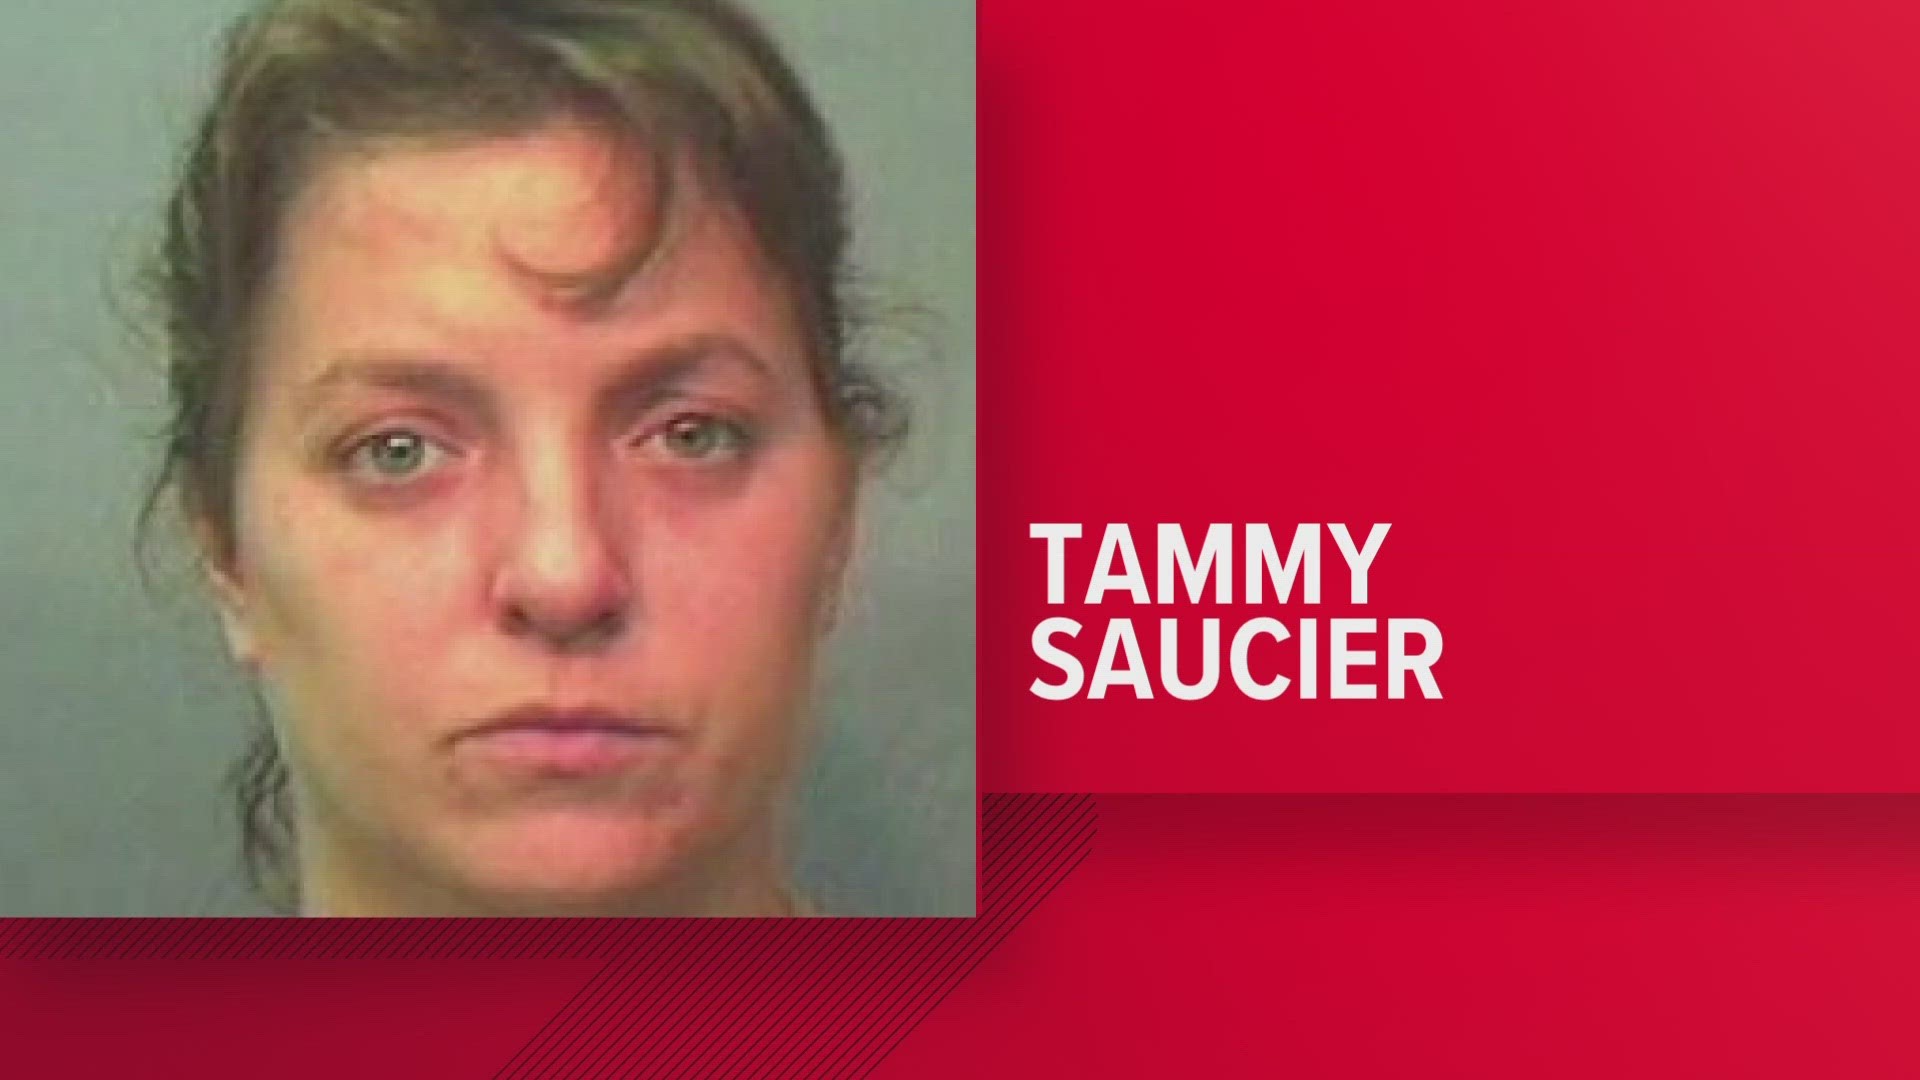 Tammy Saucier, 51, is facing five counts of second-degree attempted murder after she shot at Clay County deputies at a cemetery on Tuesday. No deputies were injured.